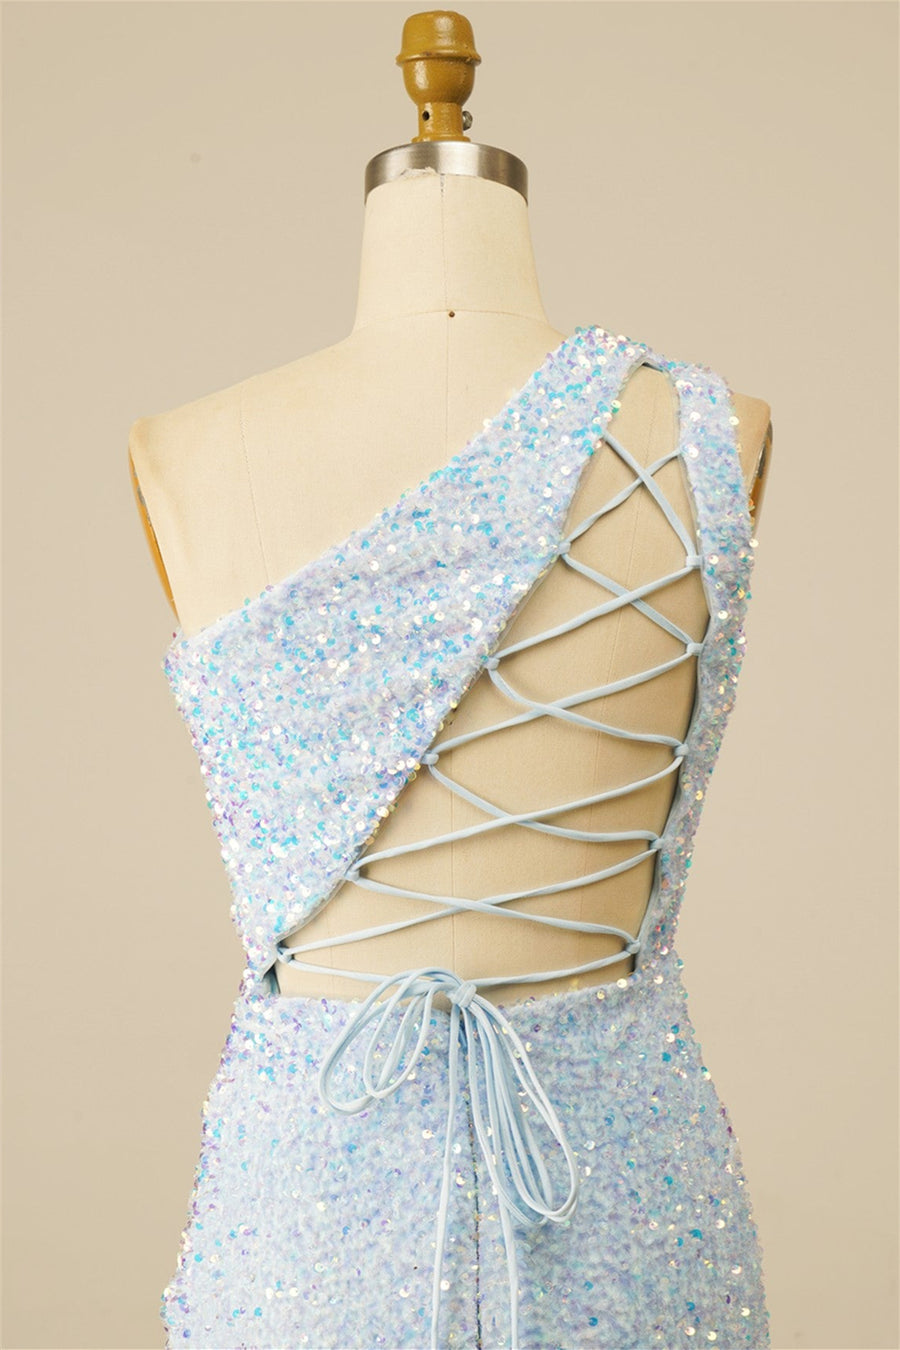 Light Blue Sheath Lace-Up One Shoulder Sequins Homecoming Dress